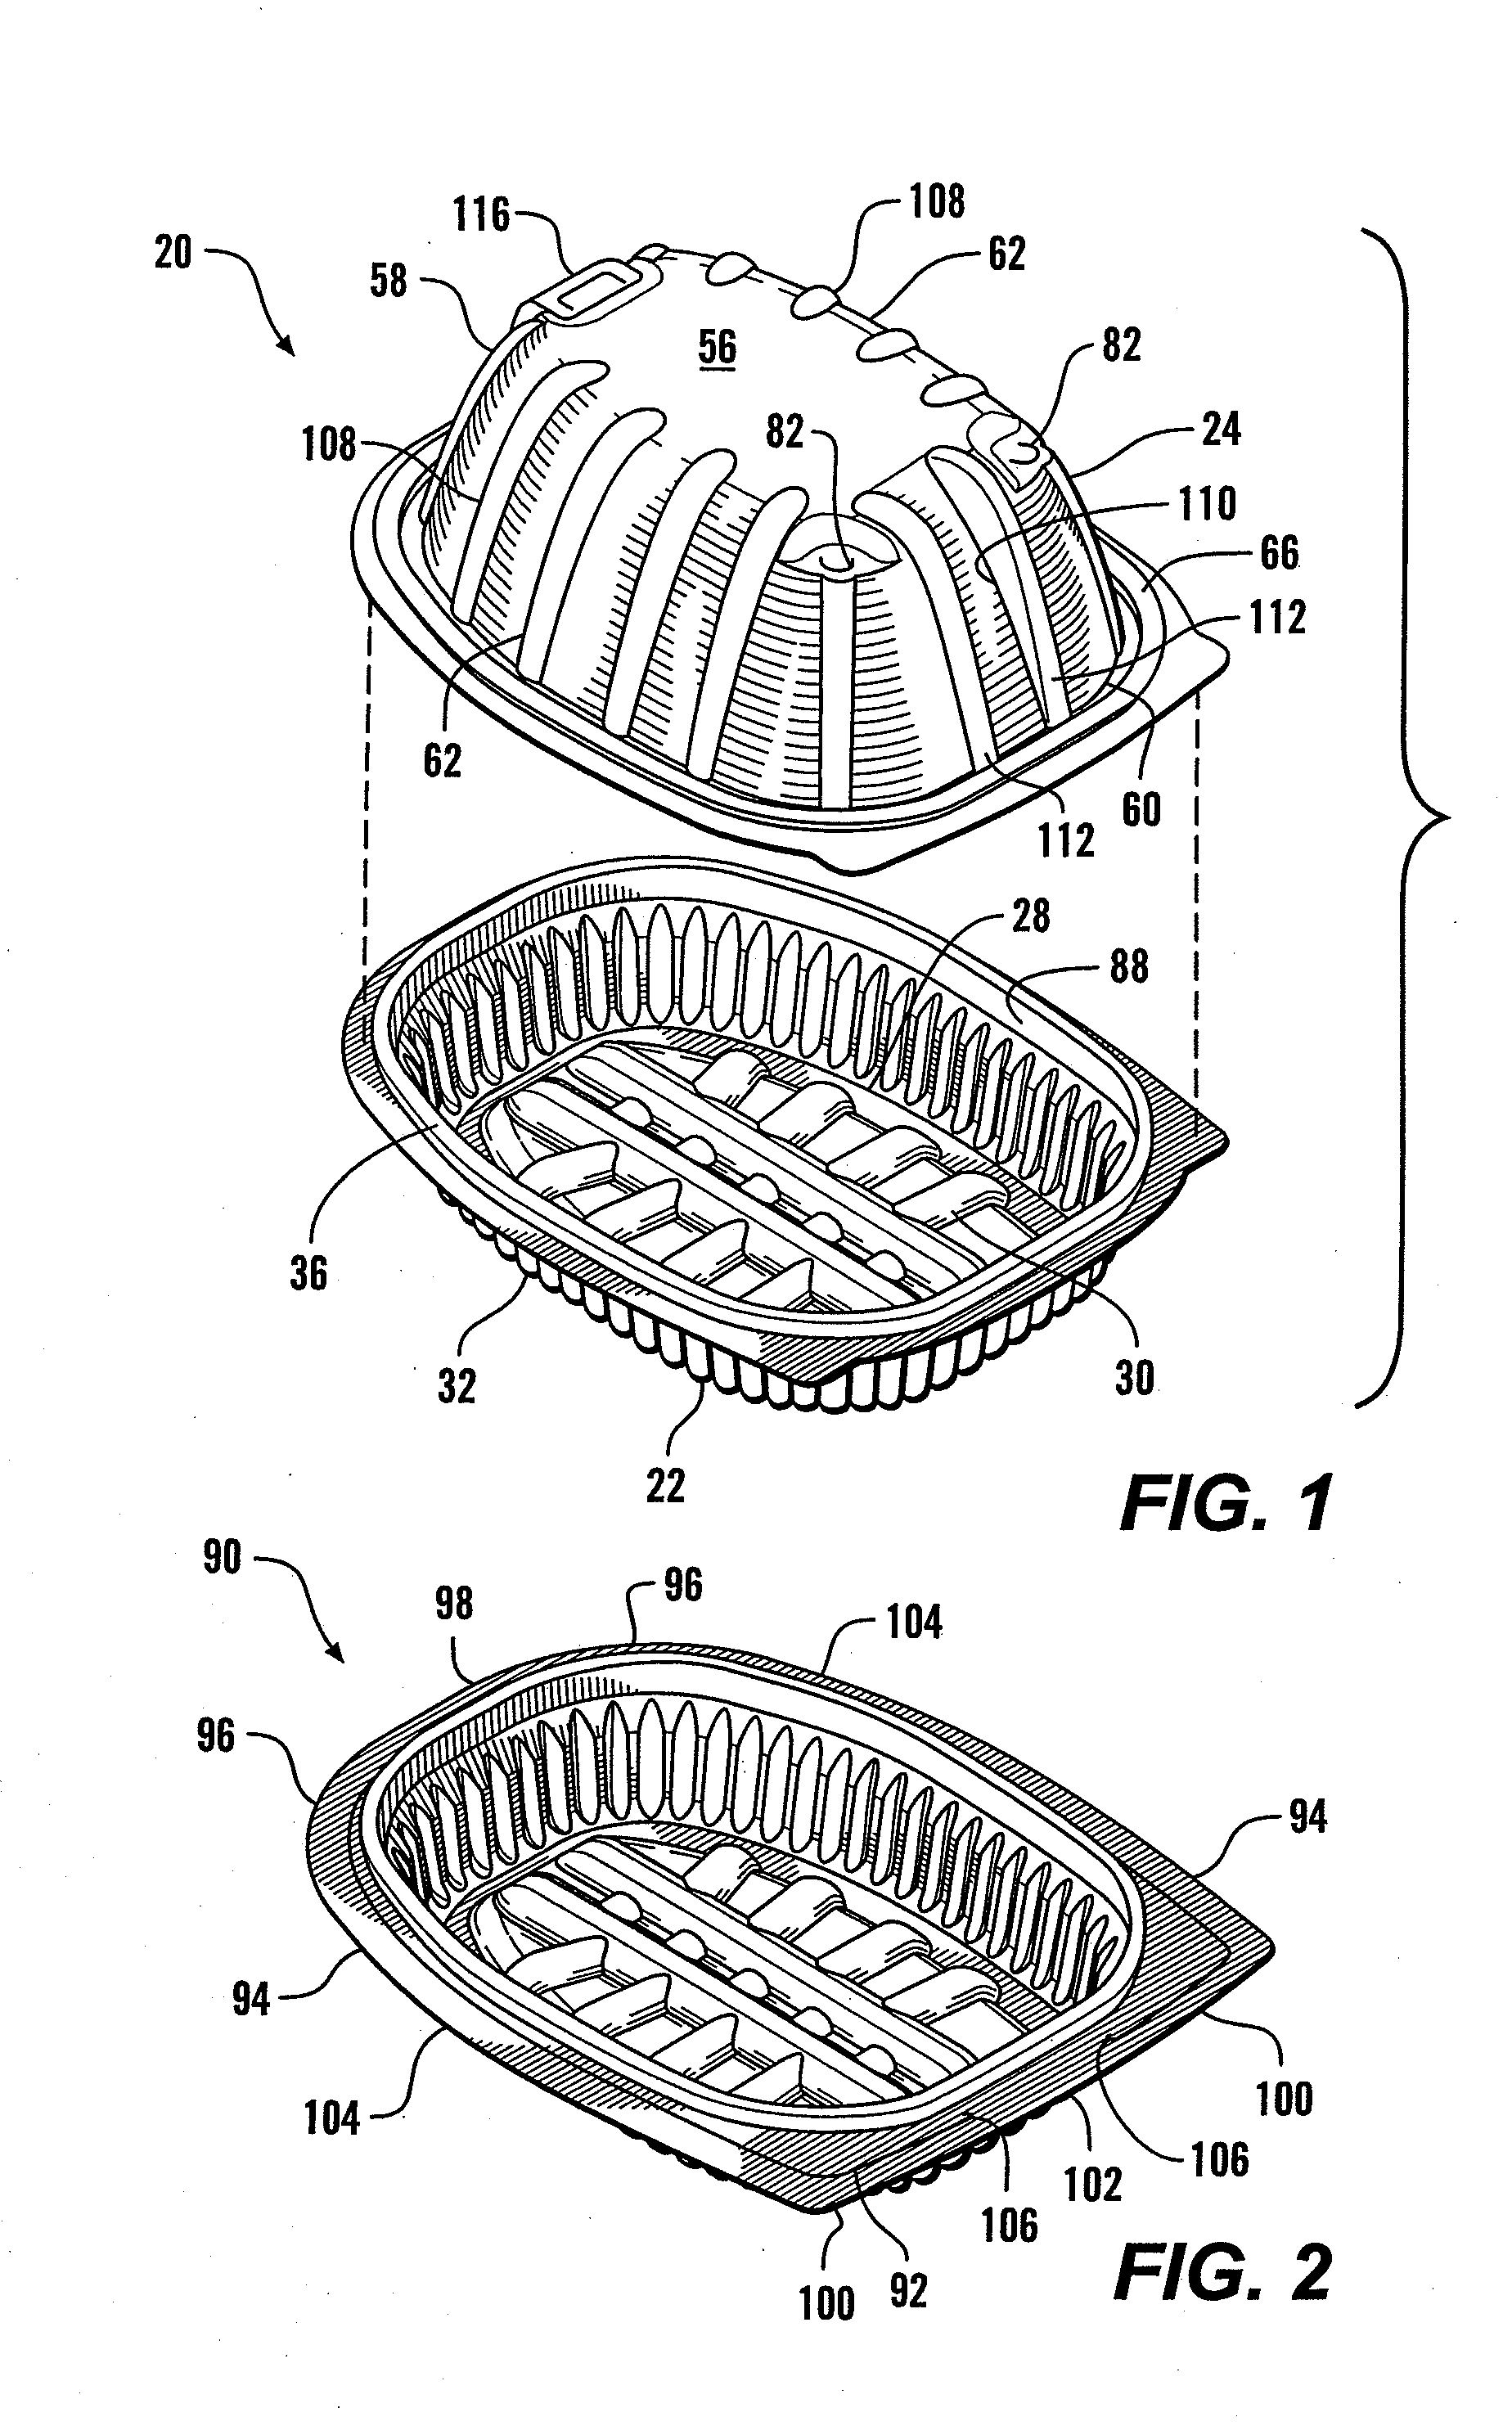 Plastic container with pivoting bottom wall portions